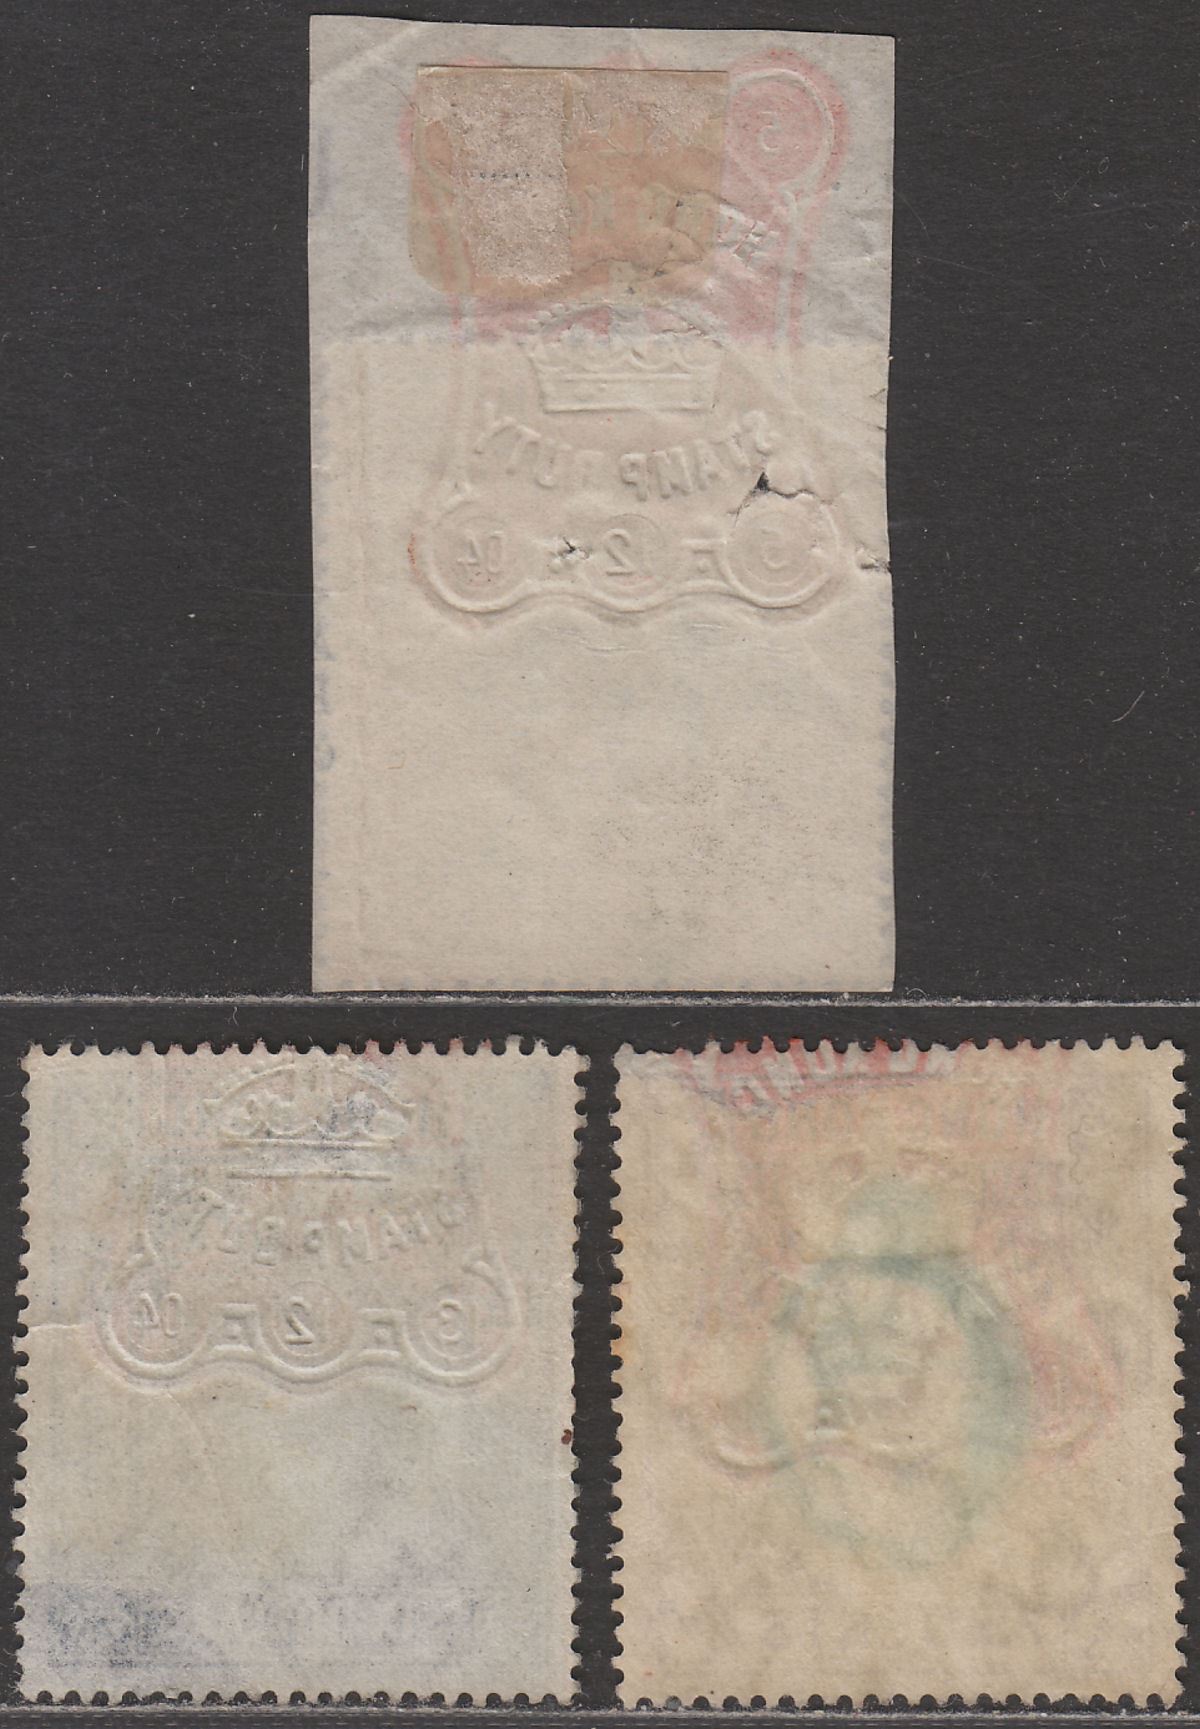 Hong Kong 1903-07 KEVII Revenue Stamp Duty 25c, 75c, $6 Used with faults